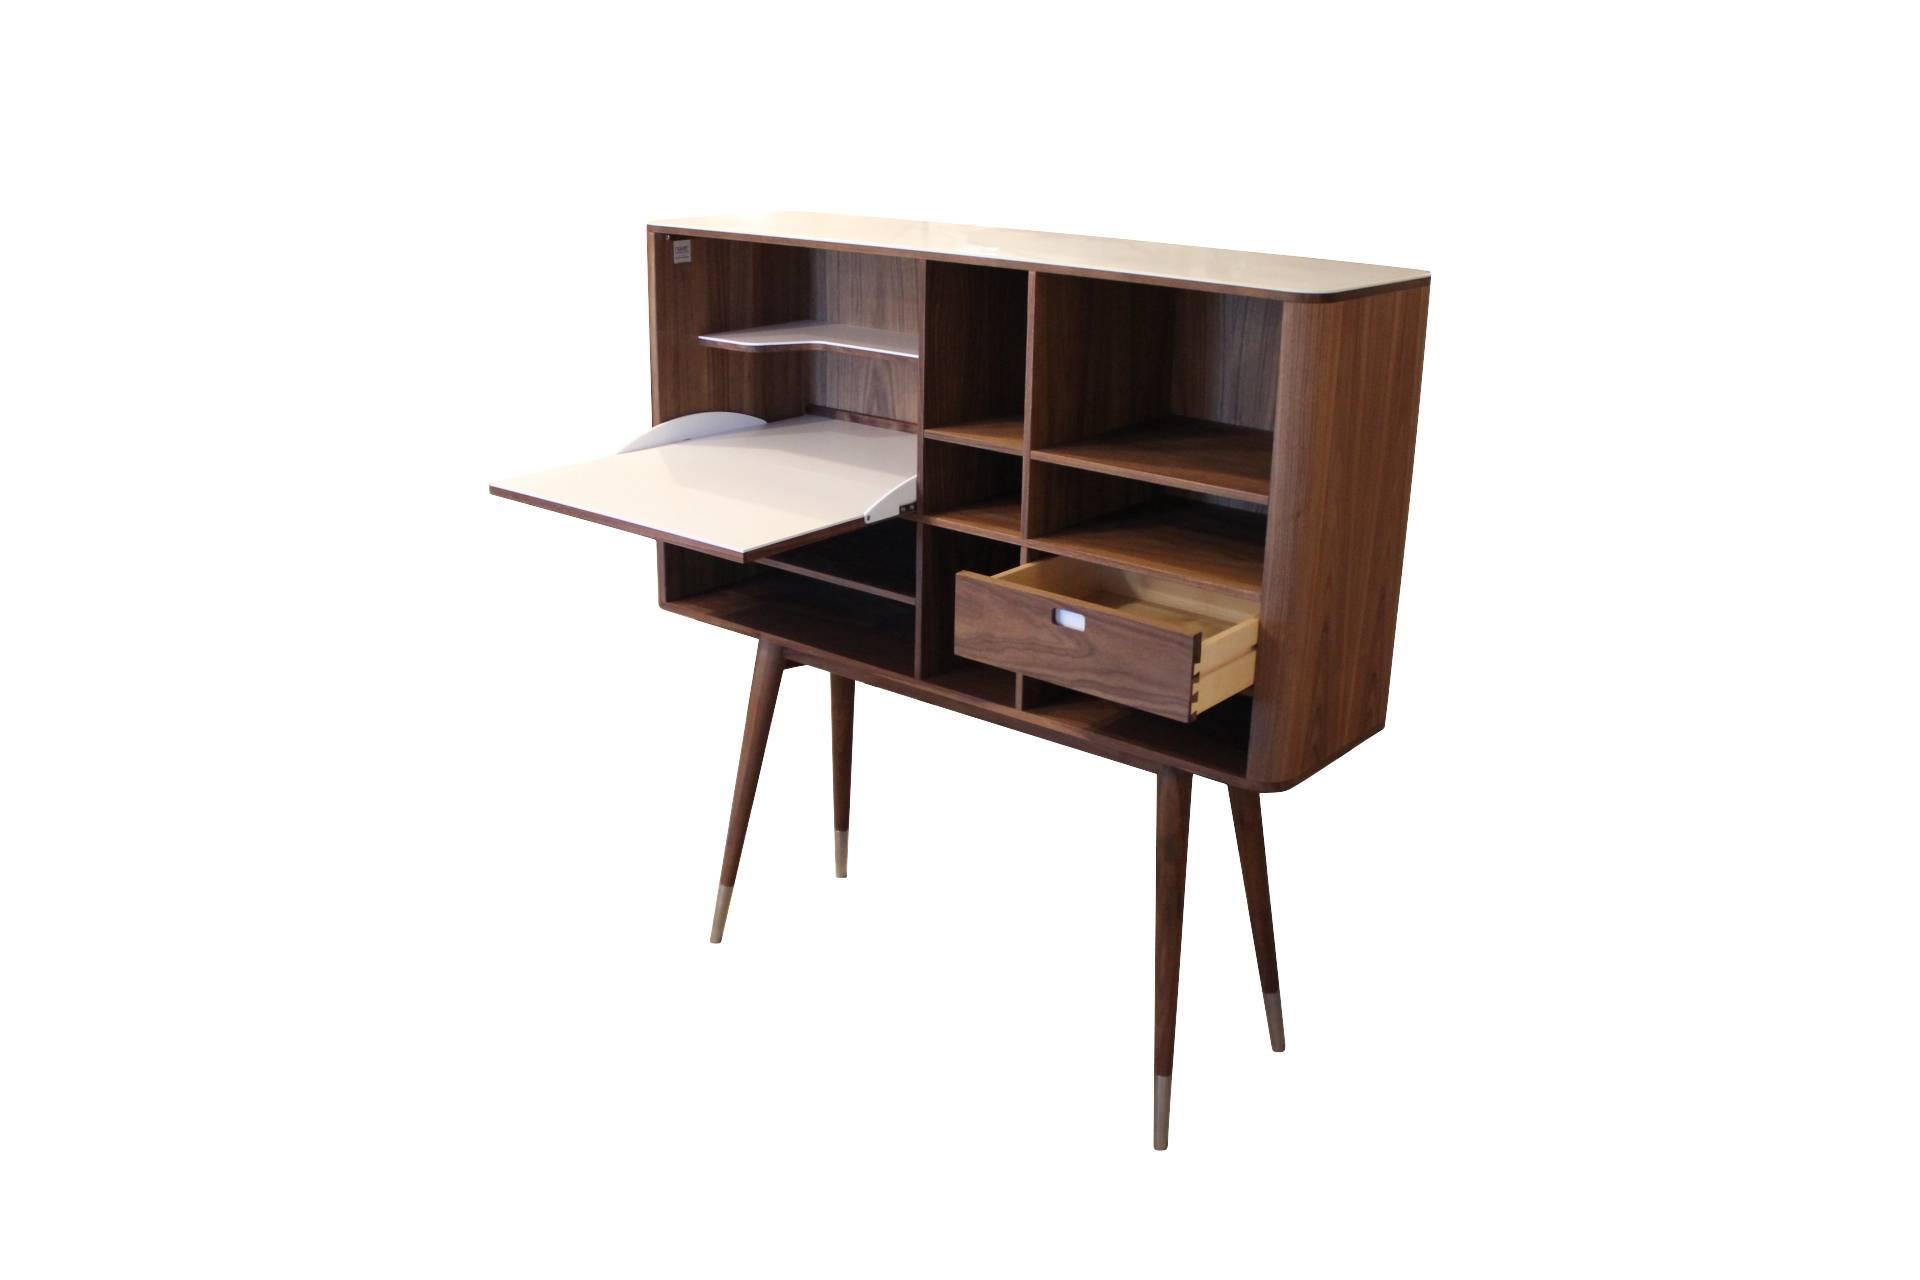 This beautiful sideboard is designed by furniture designer Ebbe Gehl. It is made from Walnut and with corian on the top of the cabinet and inside the room behind the flap lid. The sideboard can be used boft as a buffet or as a storage unit. The